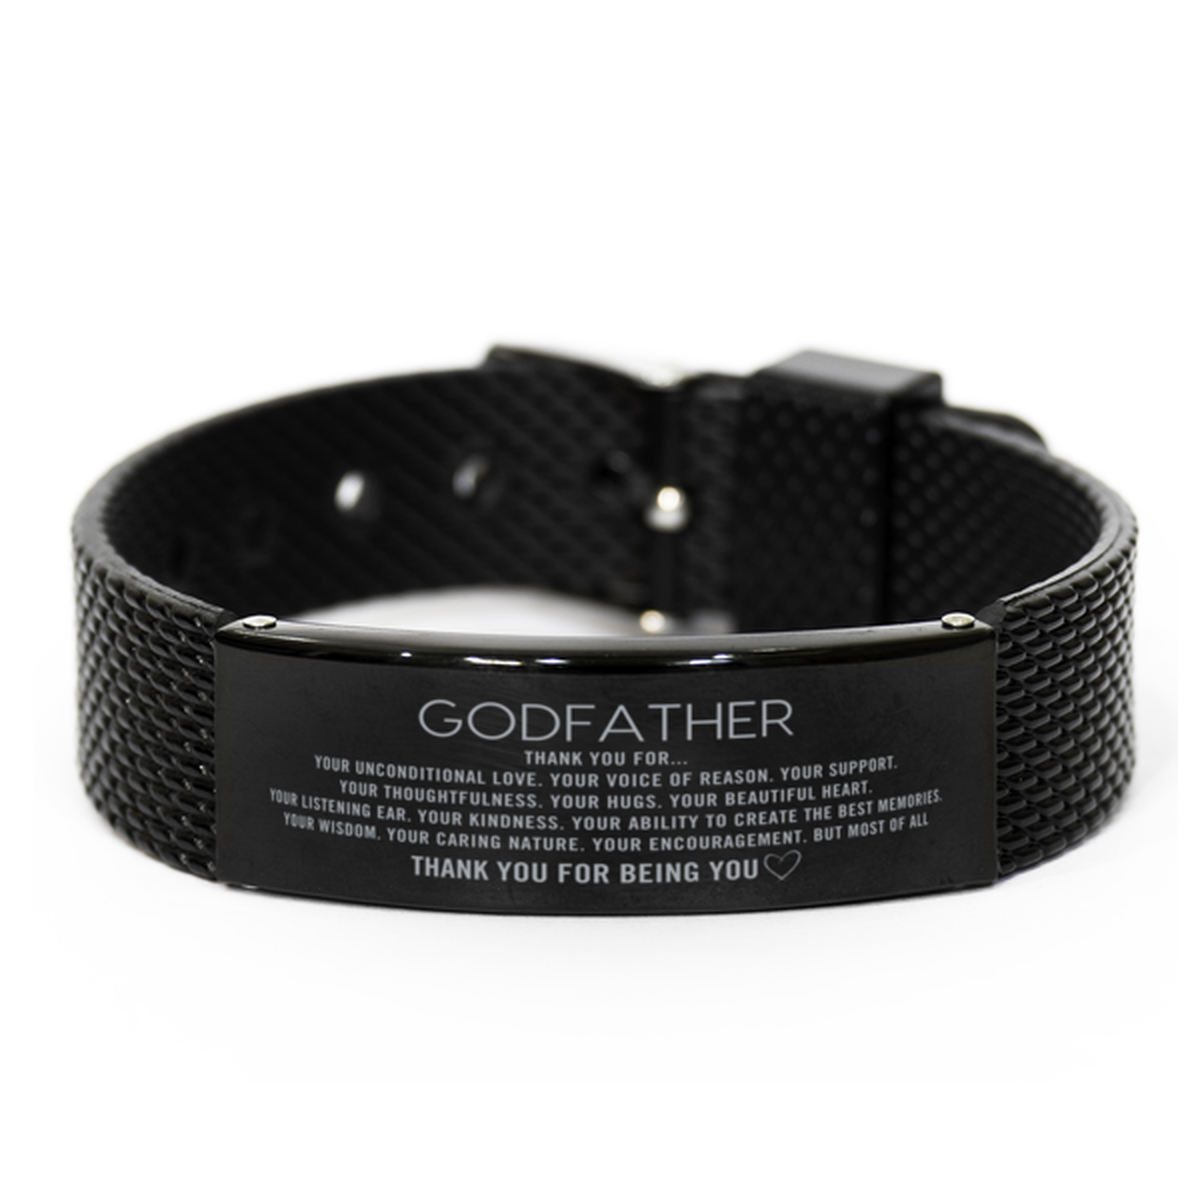 Godfather Black Shark Mesh Bracelet Custom, Engraved Gifts For Godfather Christmas Graduation Birthday Gifts for Men Women Godfather Thank you for Your unconditional love